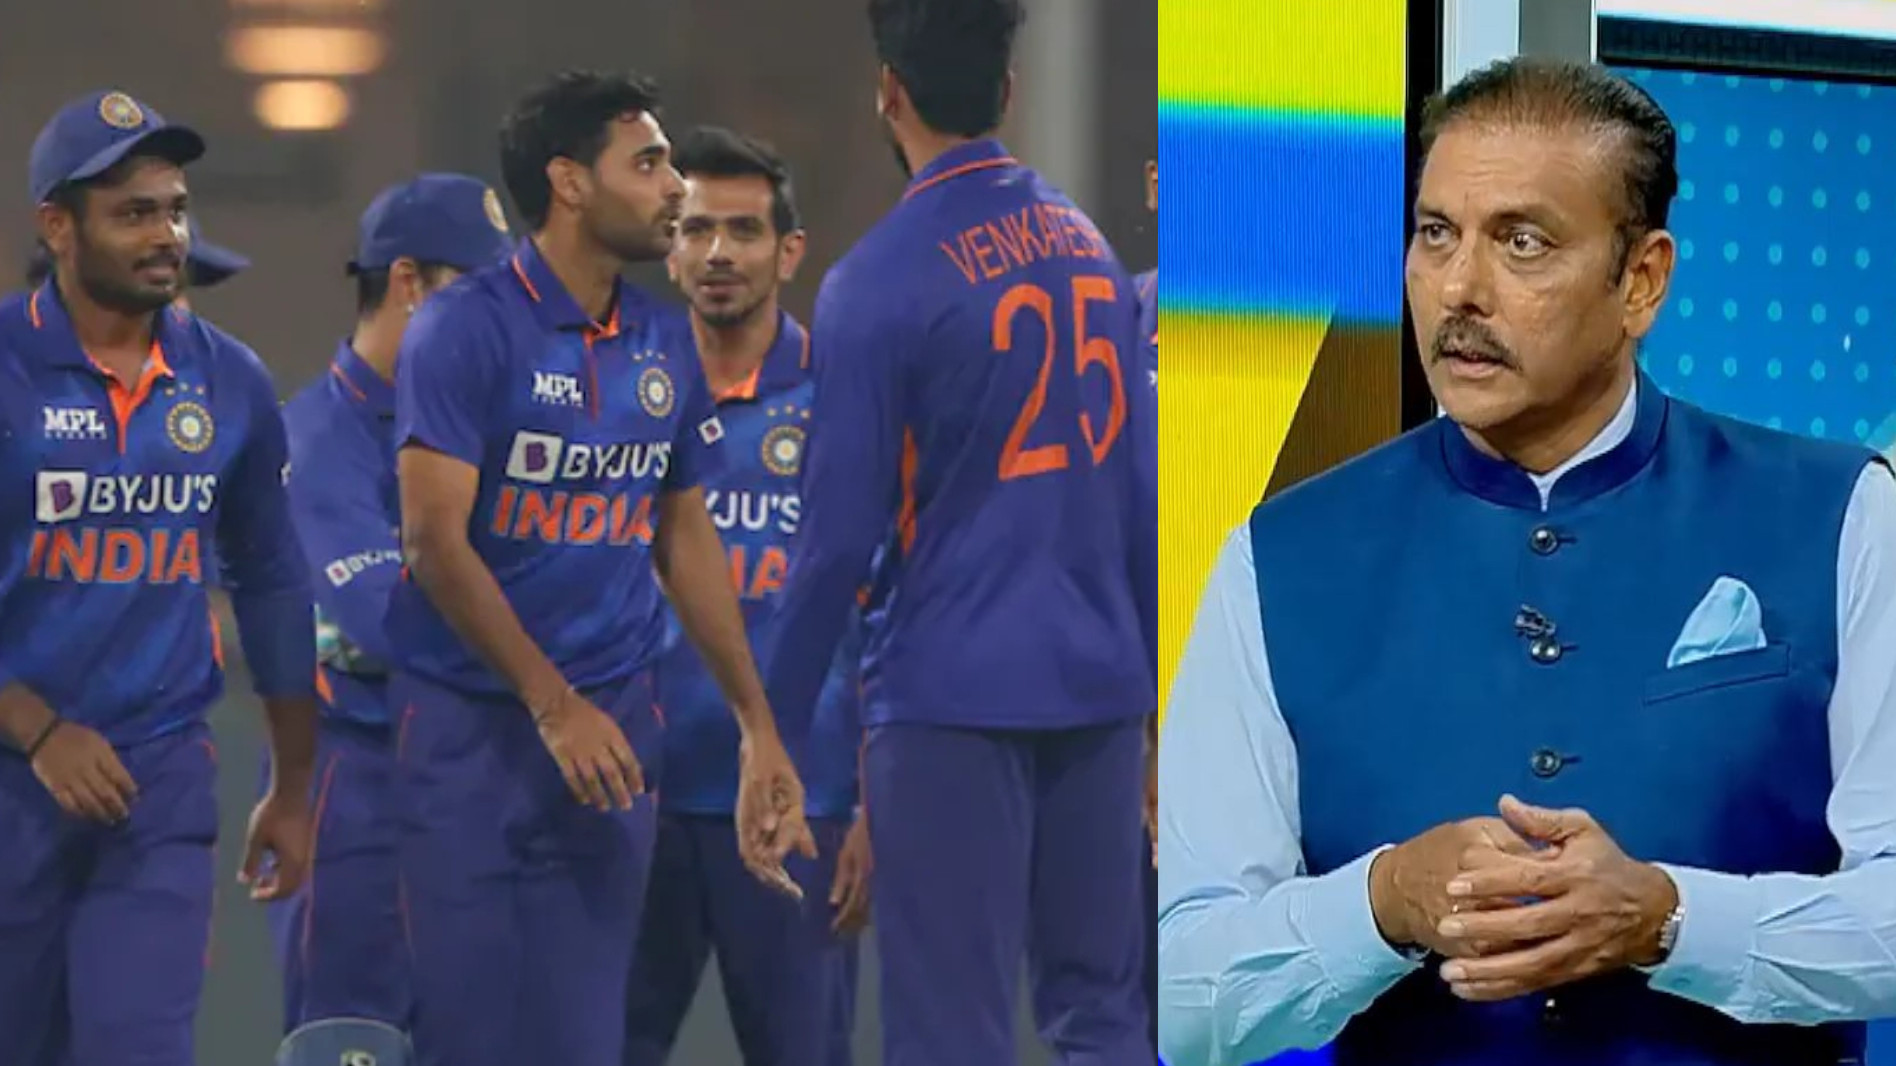 IND v SA 2022: Ravi Shastri names his India XI for the 1st T20I against South Africa